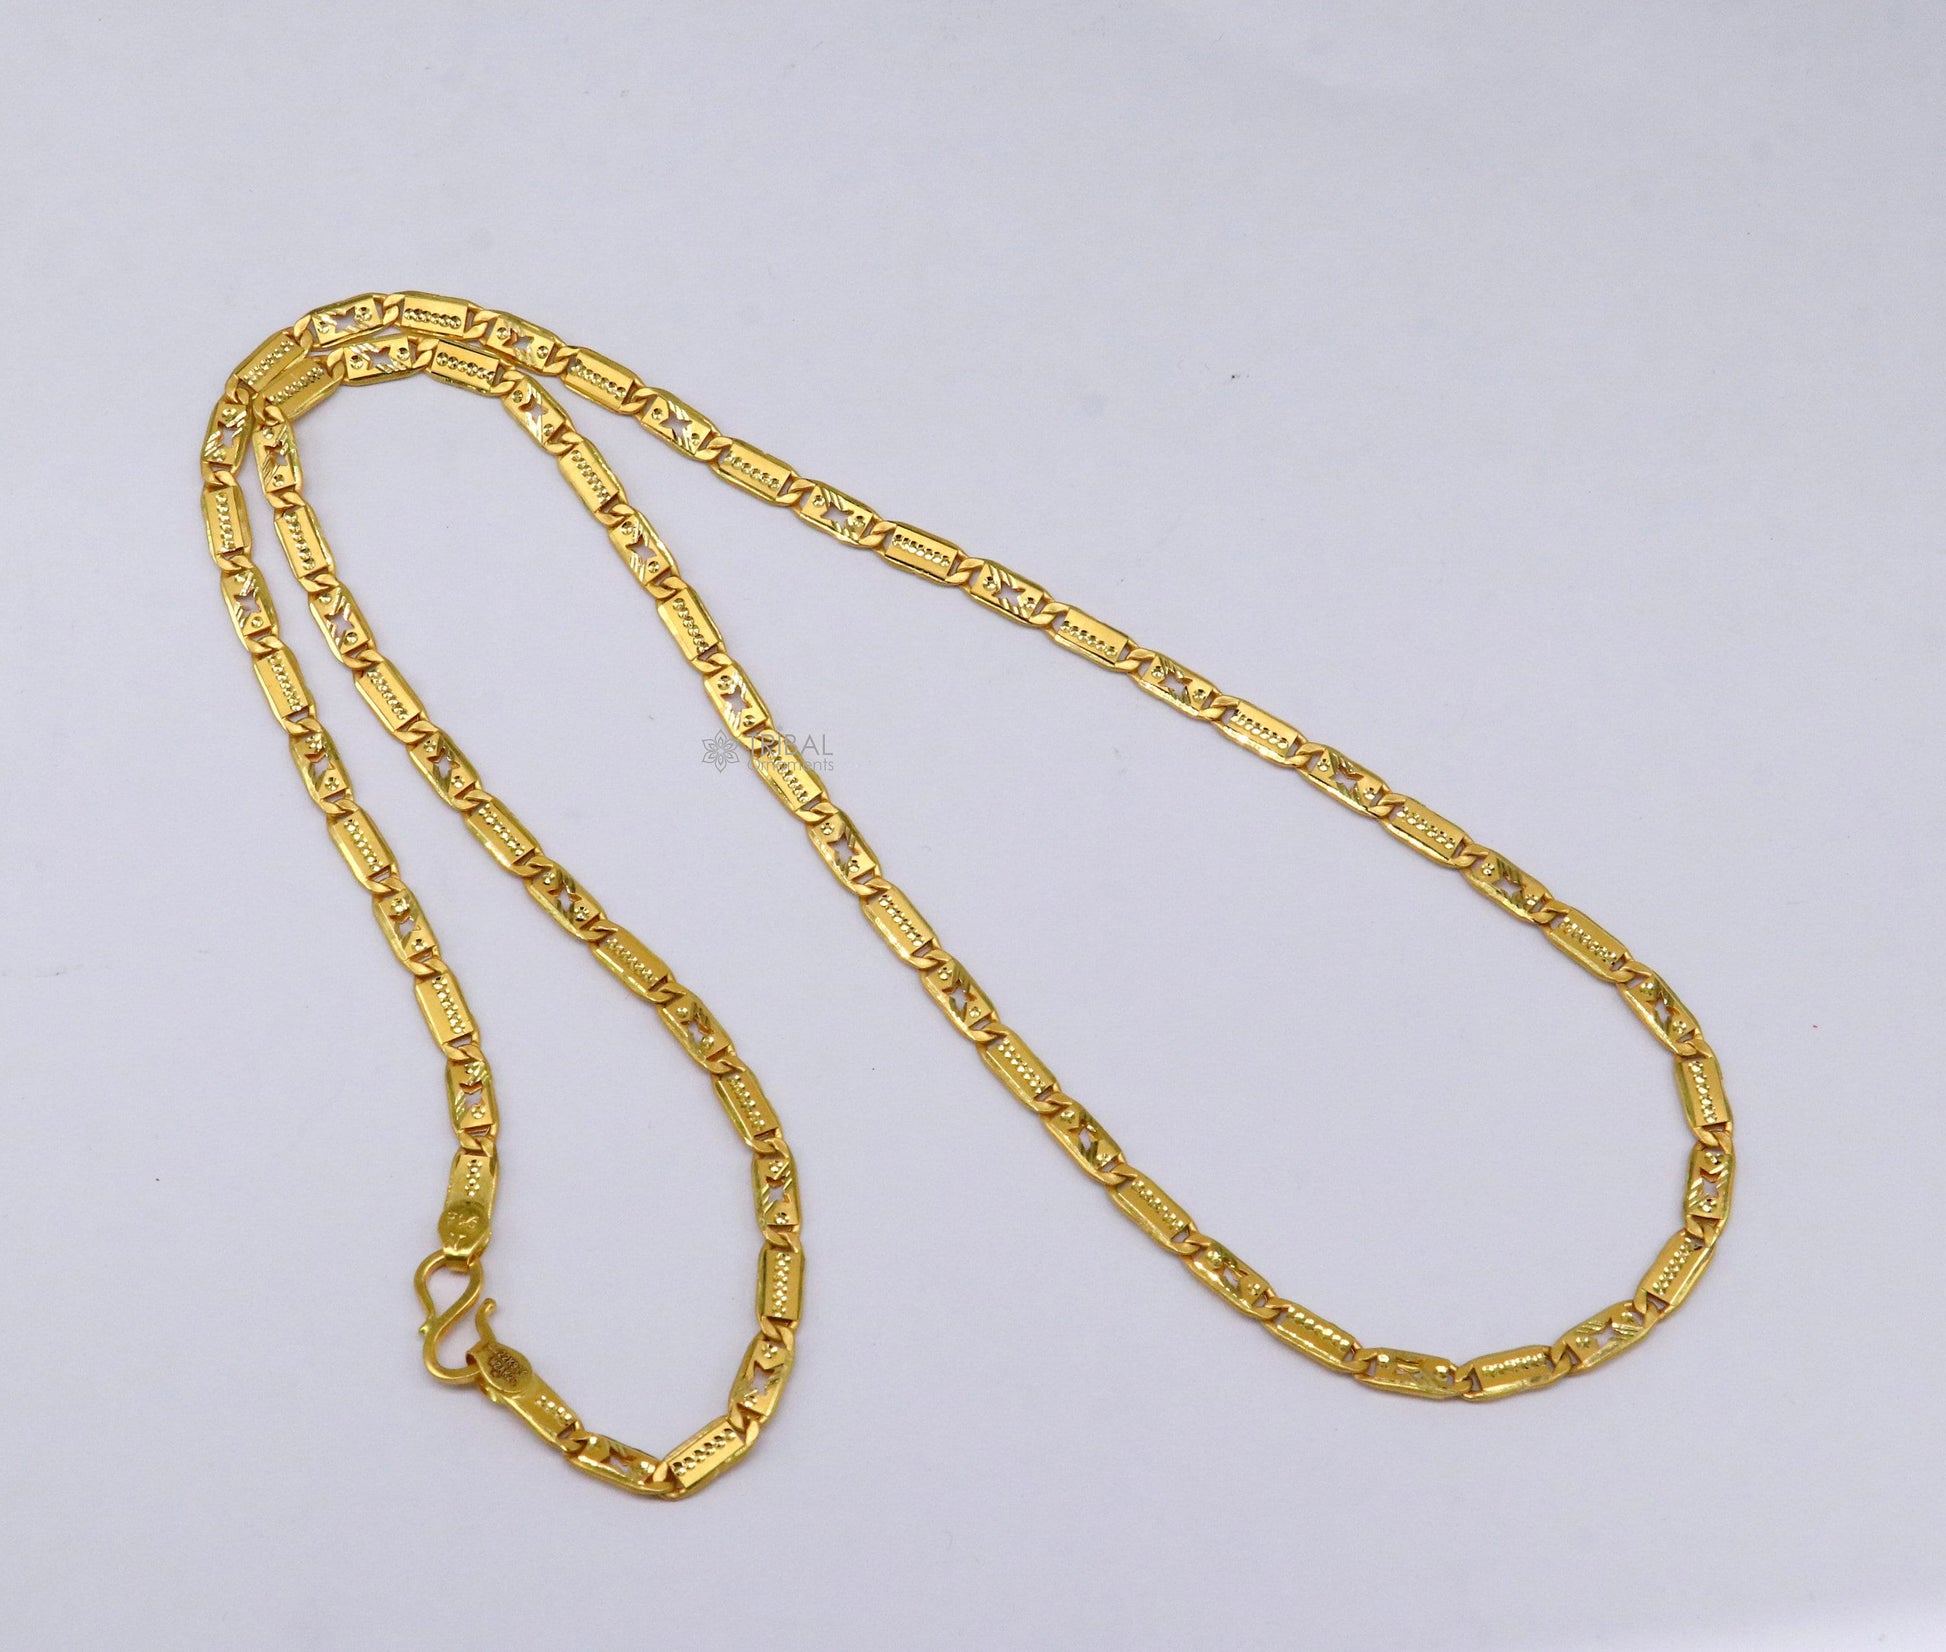 4mm all size Exclusive modern trendy 22kt yellow gold handmade nawabi chain best men's gifting chain necklace jewelry gch585 - TRIBAL ORNAMENTS